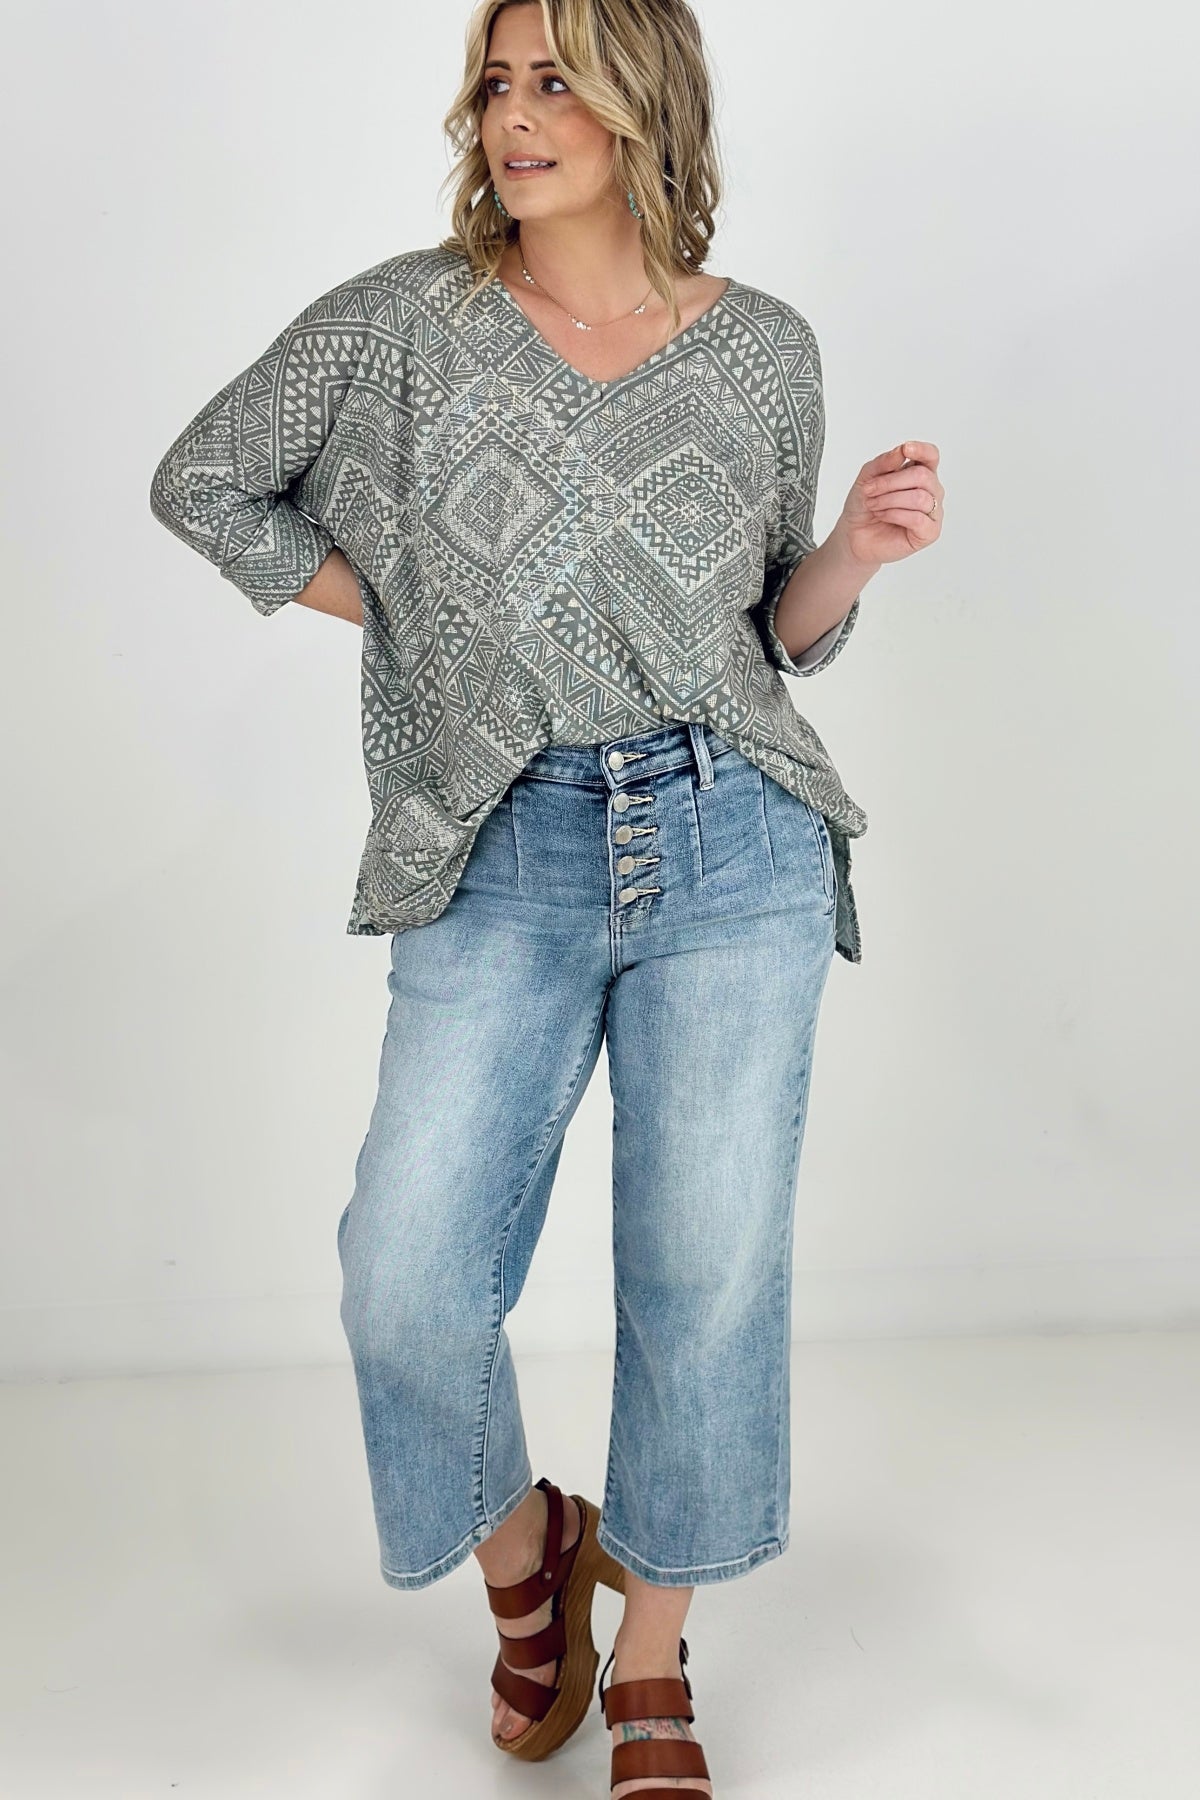 SAGE BiBi Aztec Print French Terry V Neck Top - Ships from The US - women's blouse at TFC&H Co.